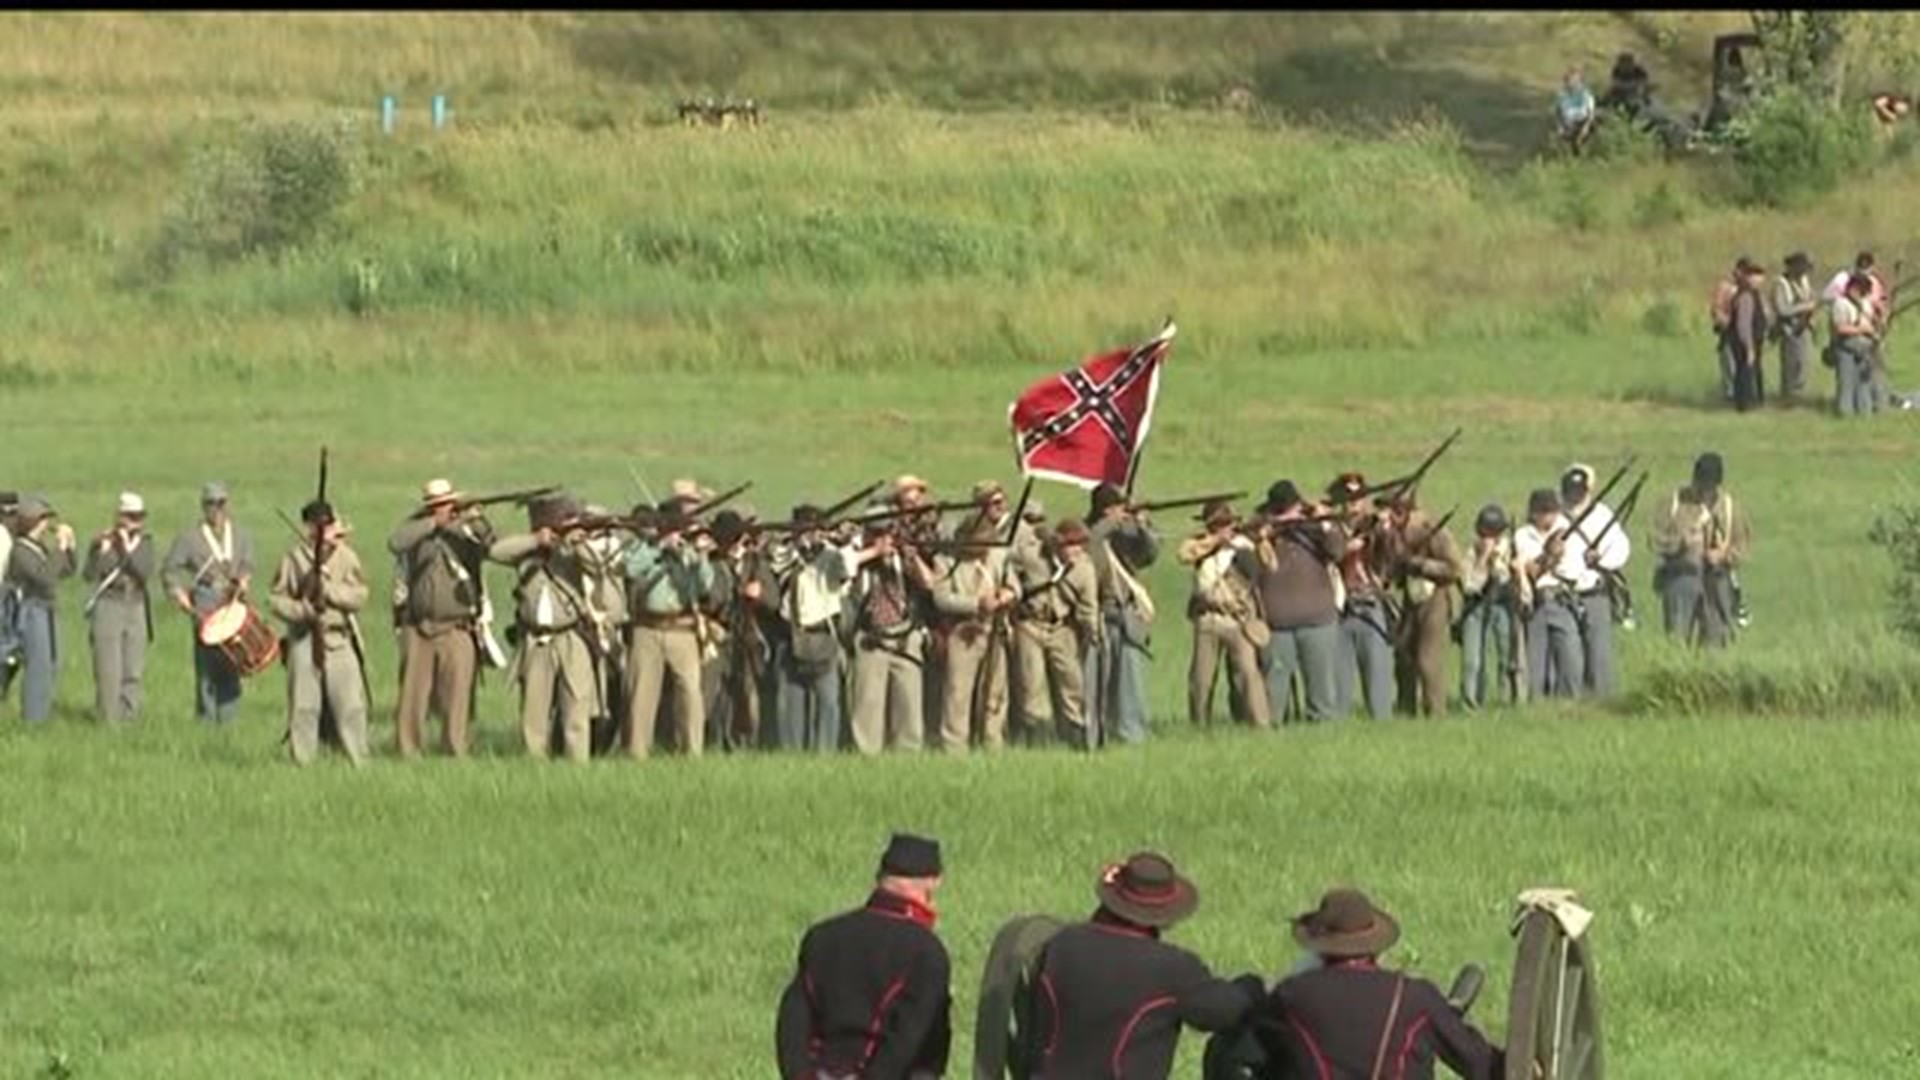 Gettysburg reenactment includes many women as soldiers